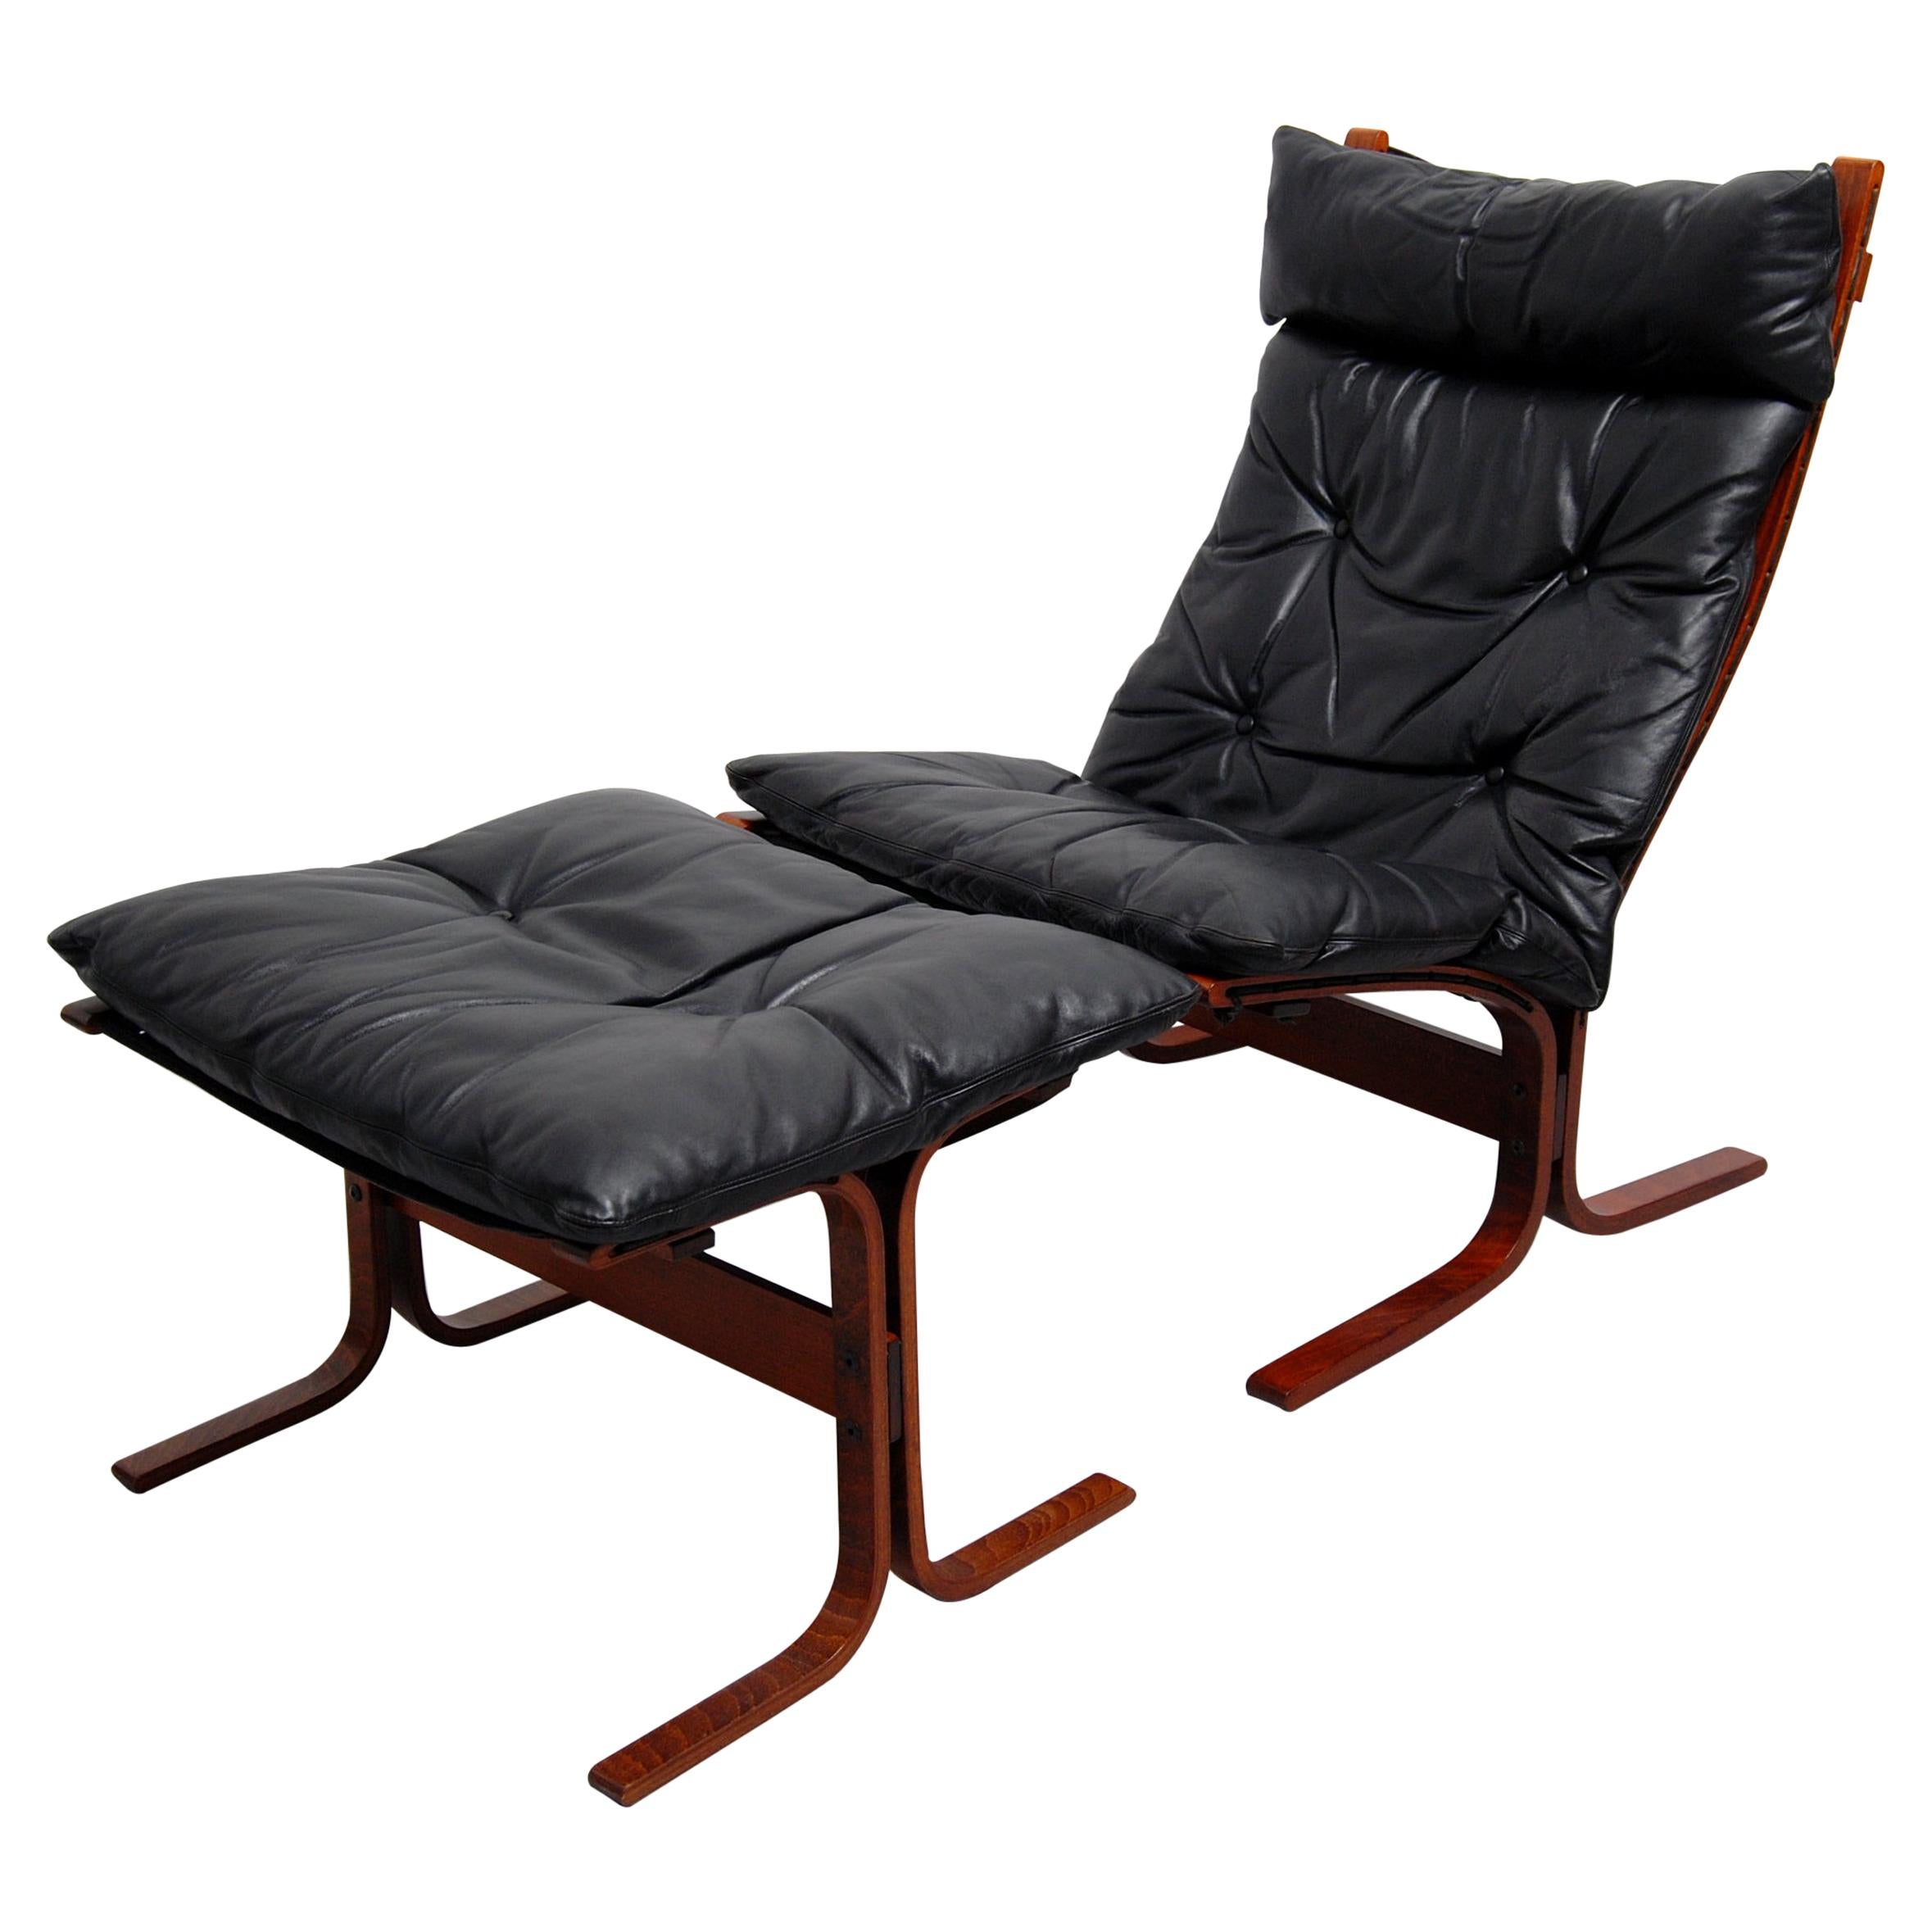 Westnofa Siesta High Back Sling Lounge Chair and Ottoman by Ingmar Relling